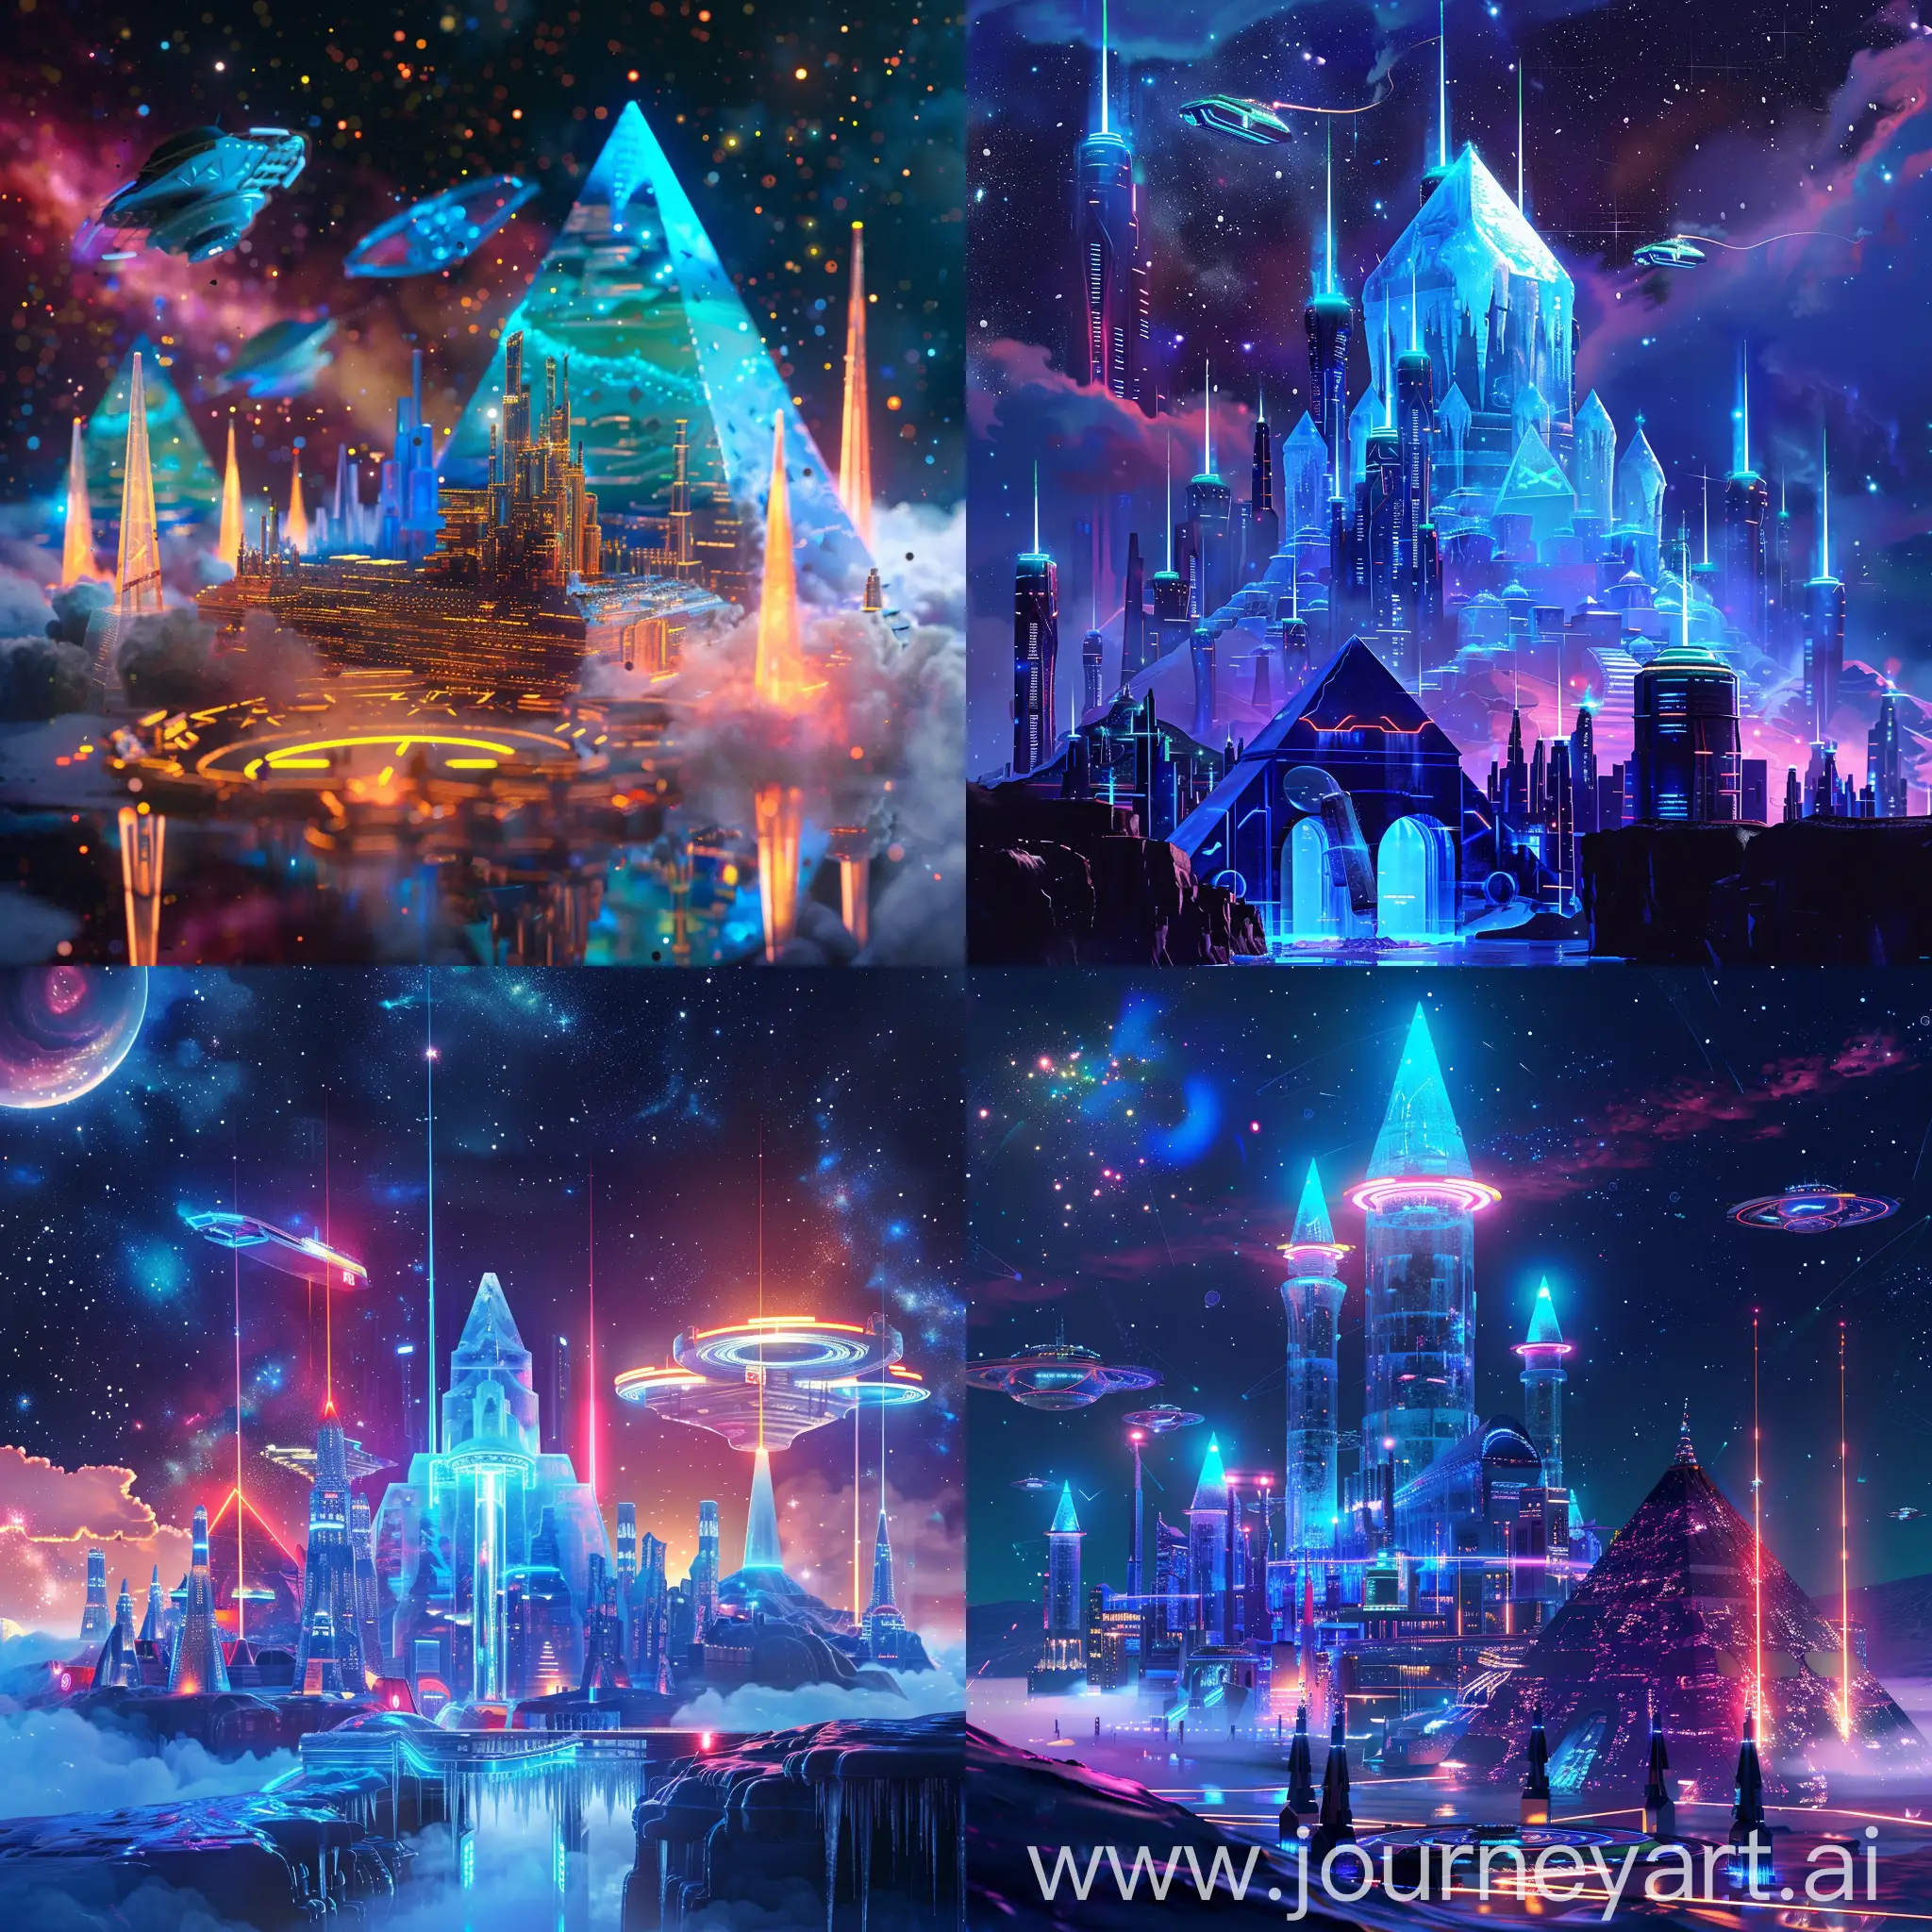 Futuristic-Galactic-City-with-Cosmic-Ice-Castle-and-Glowing-Pyramids